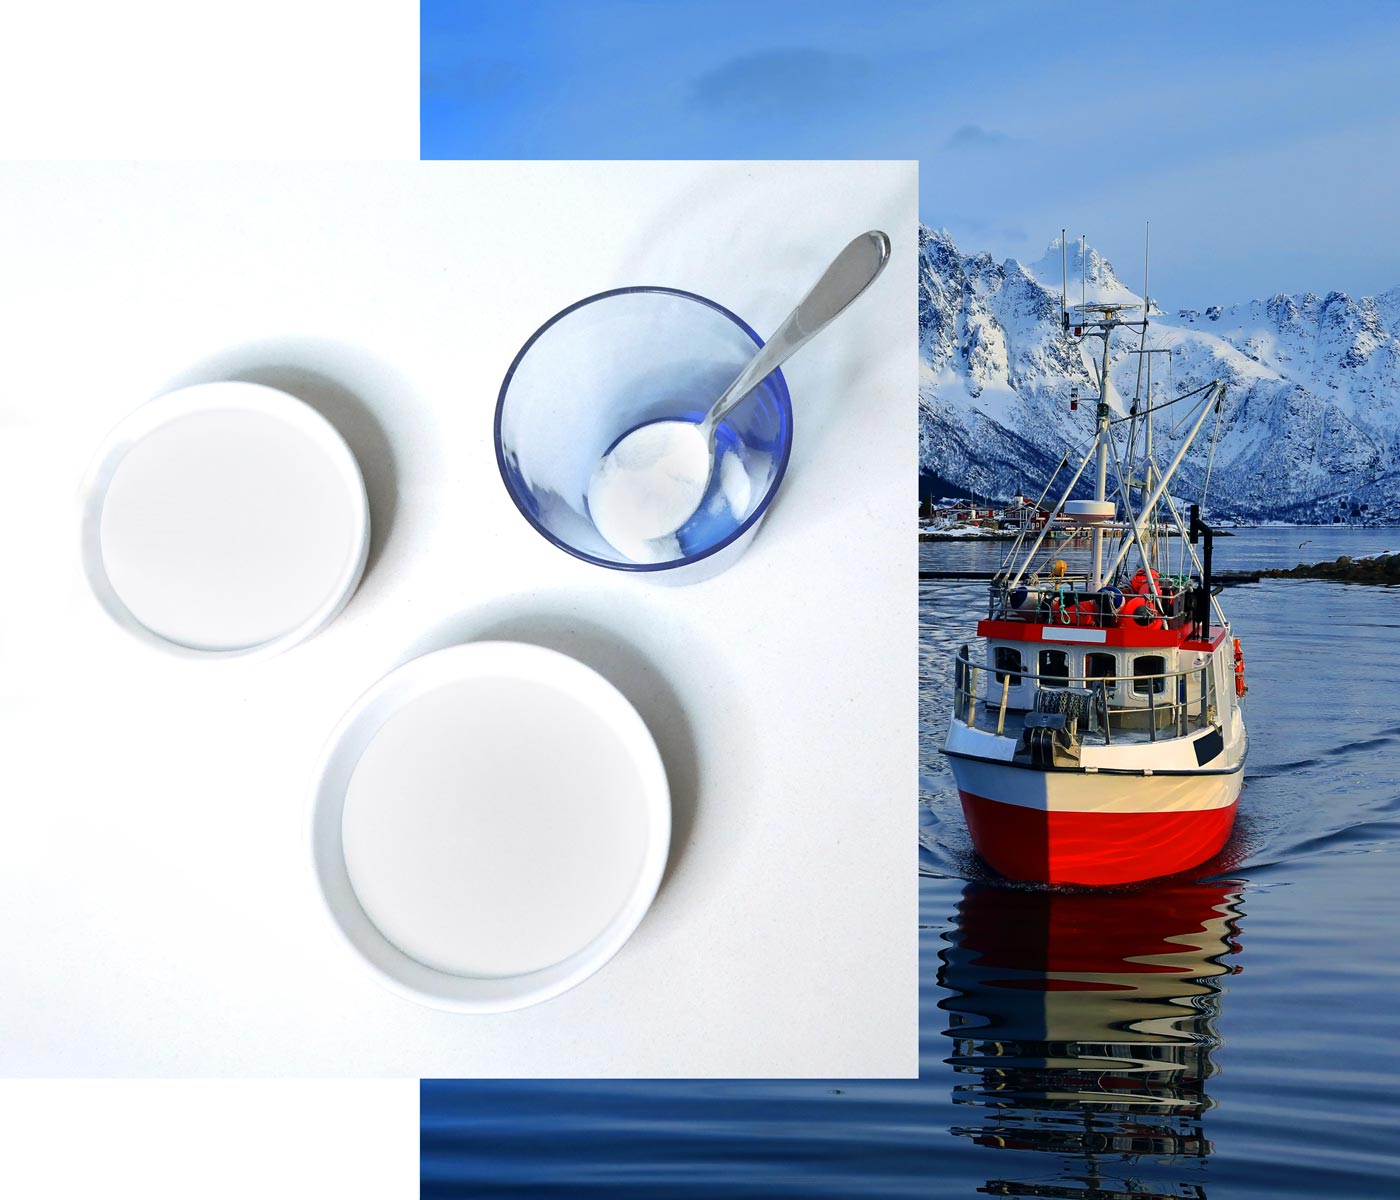 Image of nordic fishing boat on water overlayed with image of two plates and a cup with a spoon full of collagen